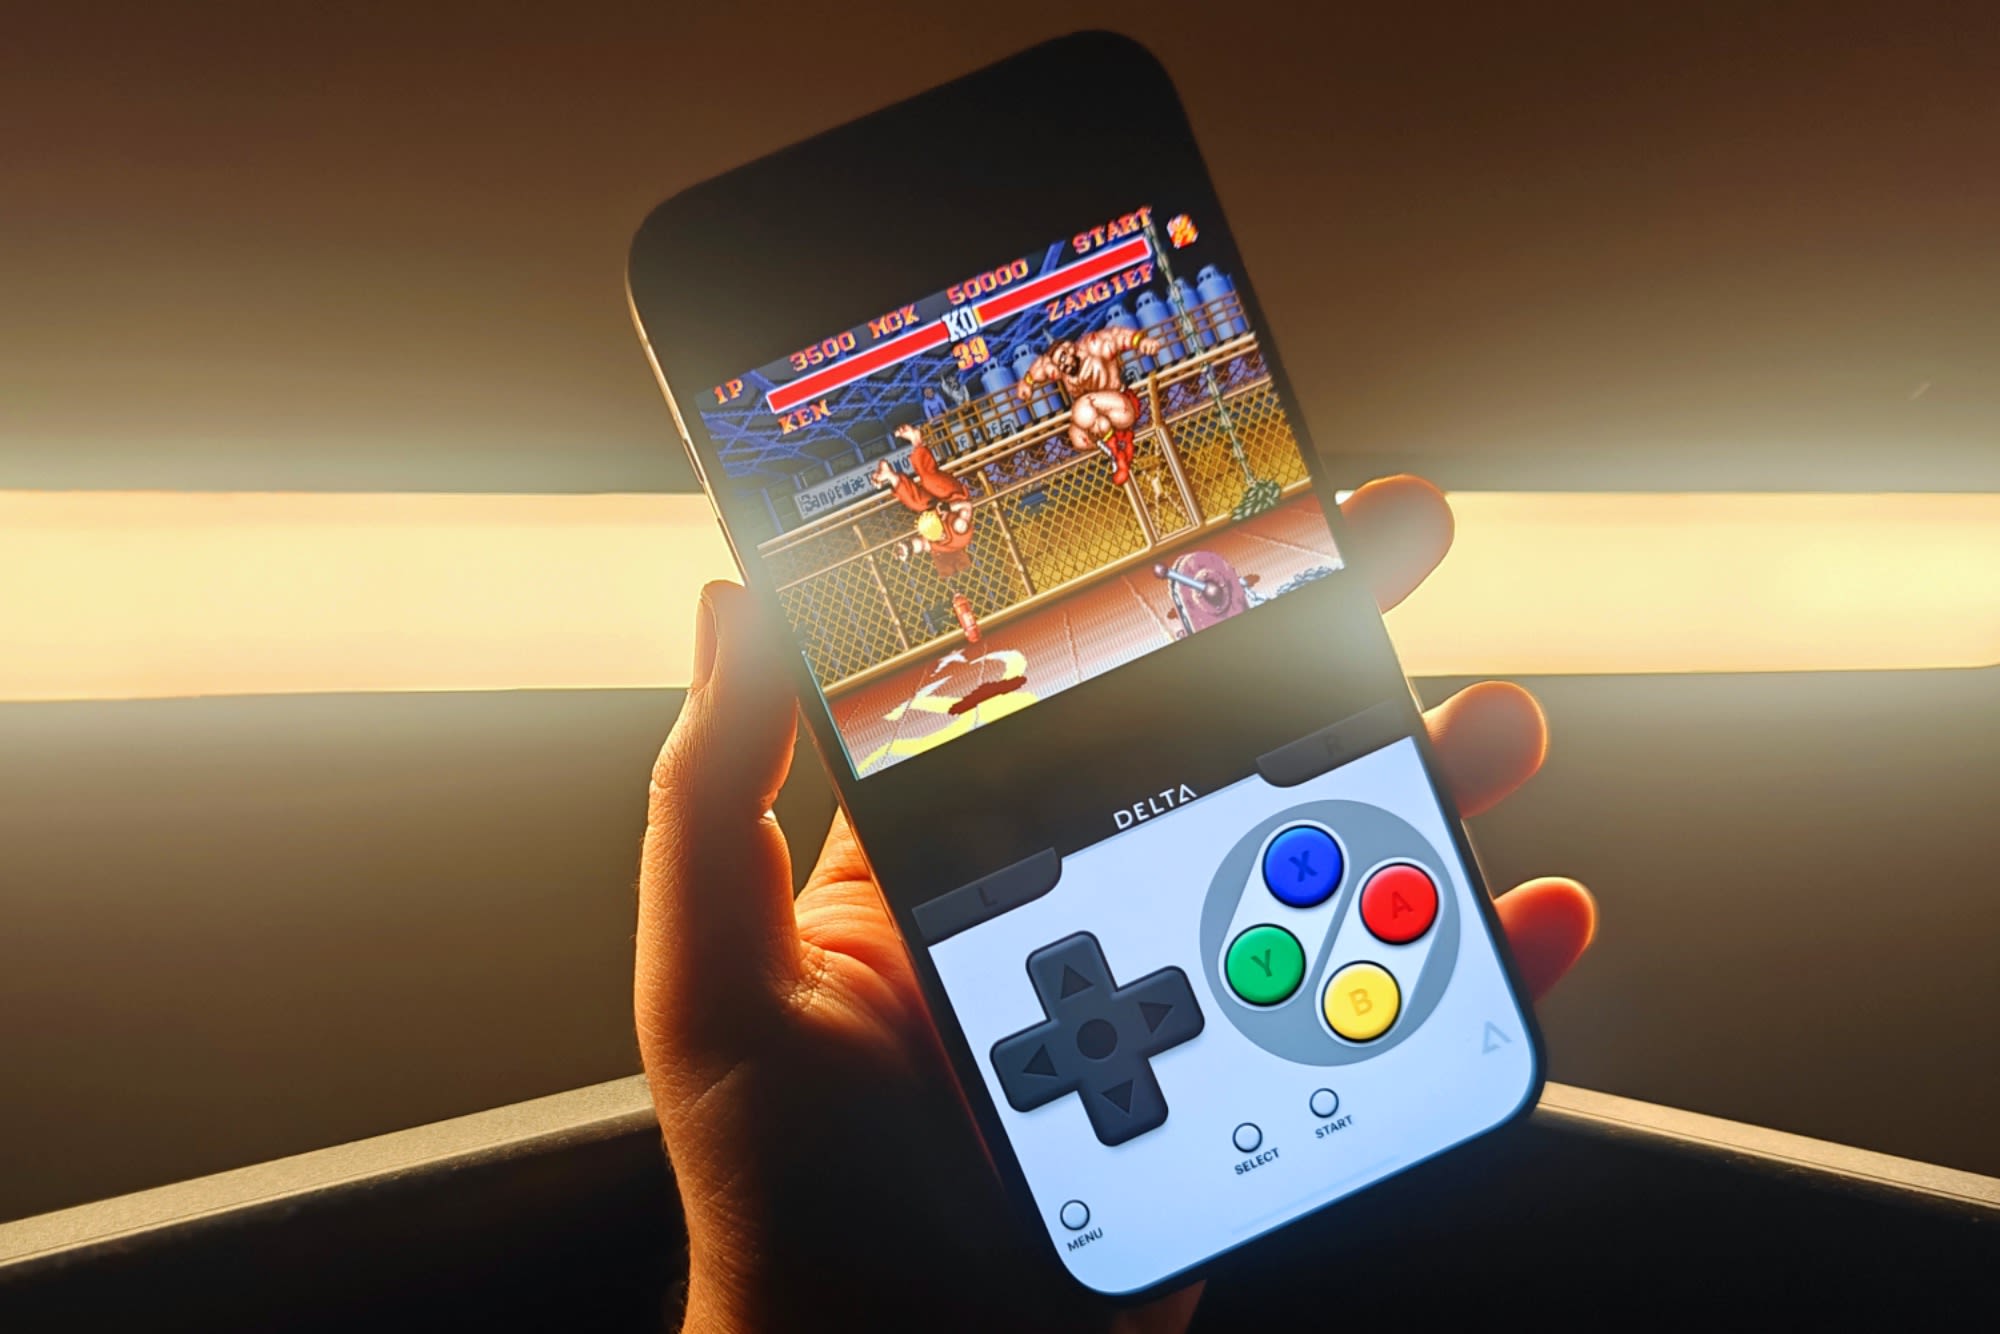 Emulators have changed the iPhone forever